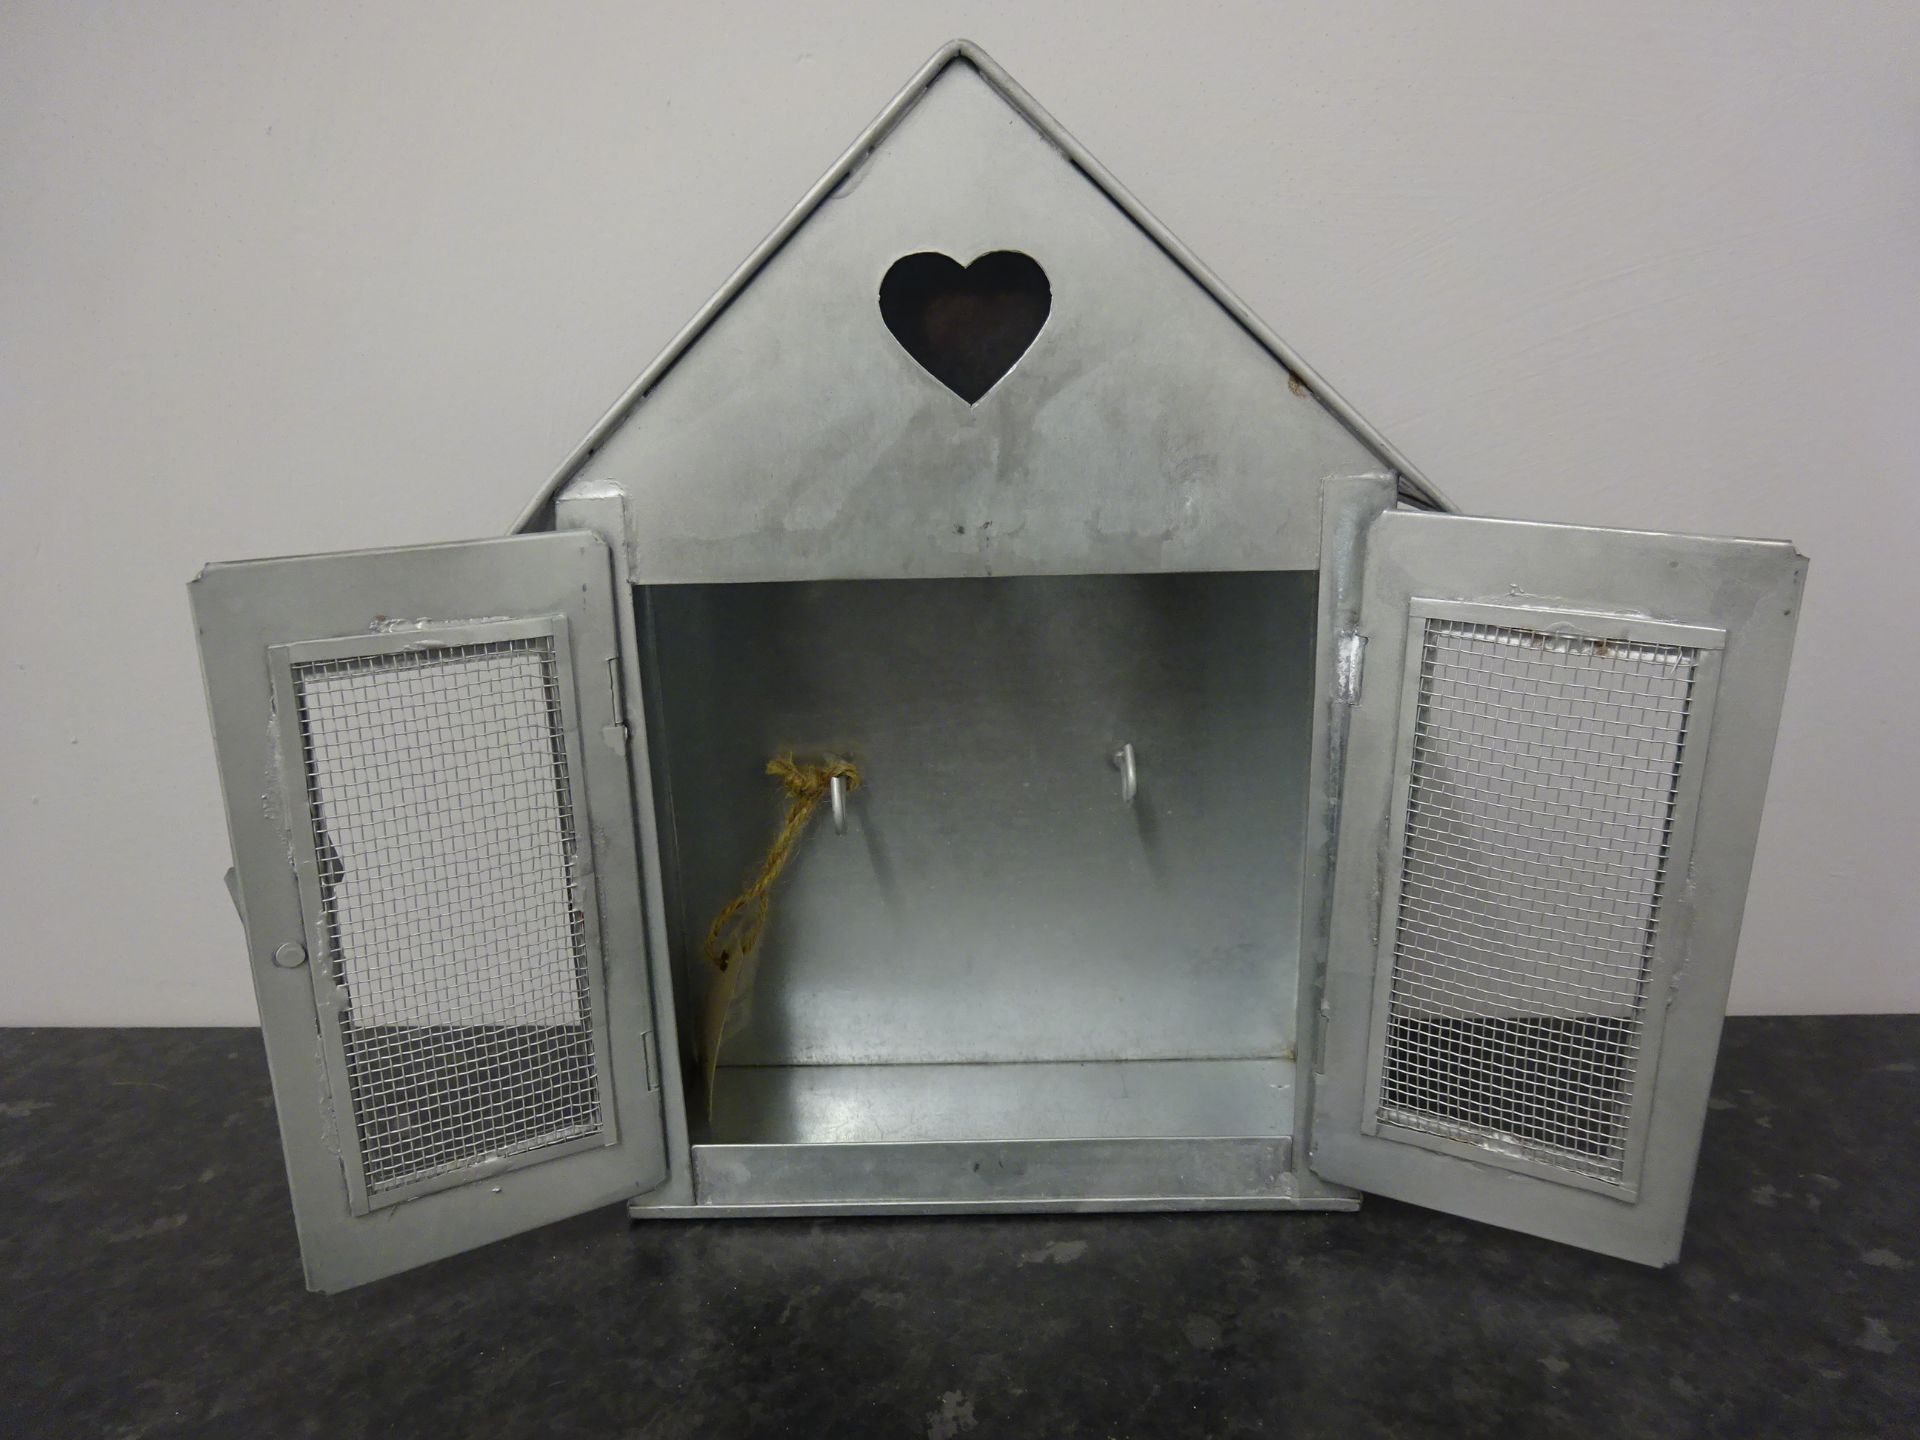 Small Love Heart Metal Key Cabinet - Image 2 of 2